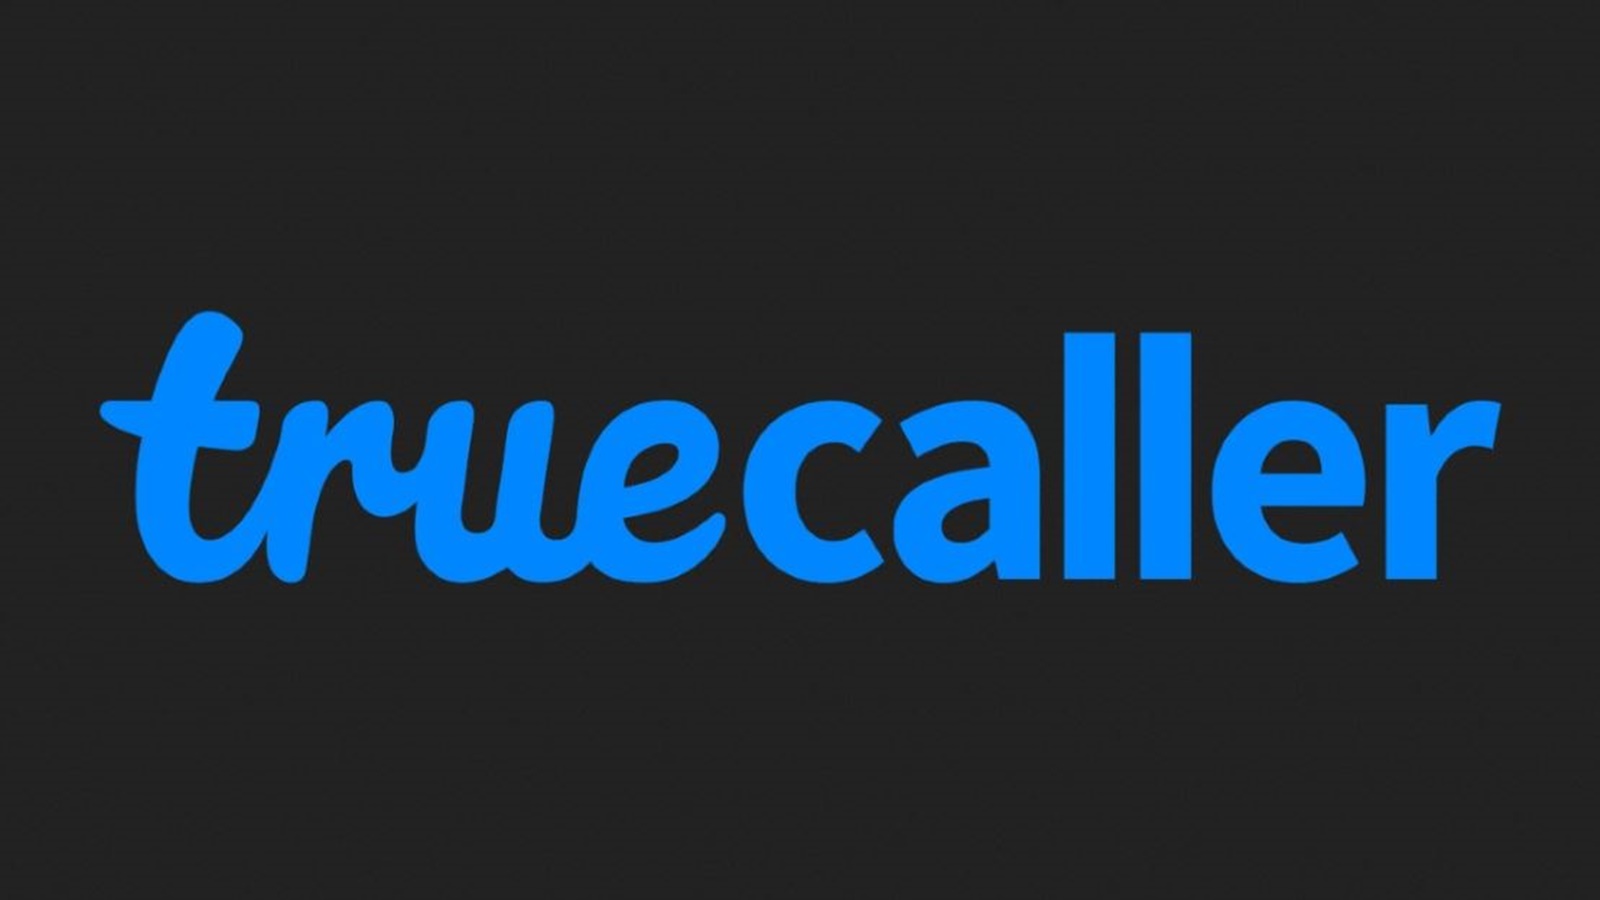 New Truecaller feature uses AI to detect and block spam calls: Here’s how to enable it | Technology News